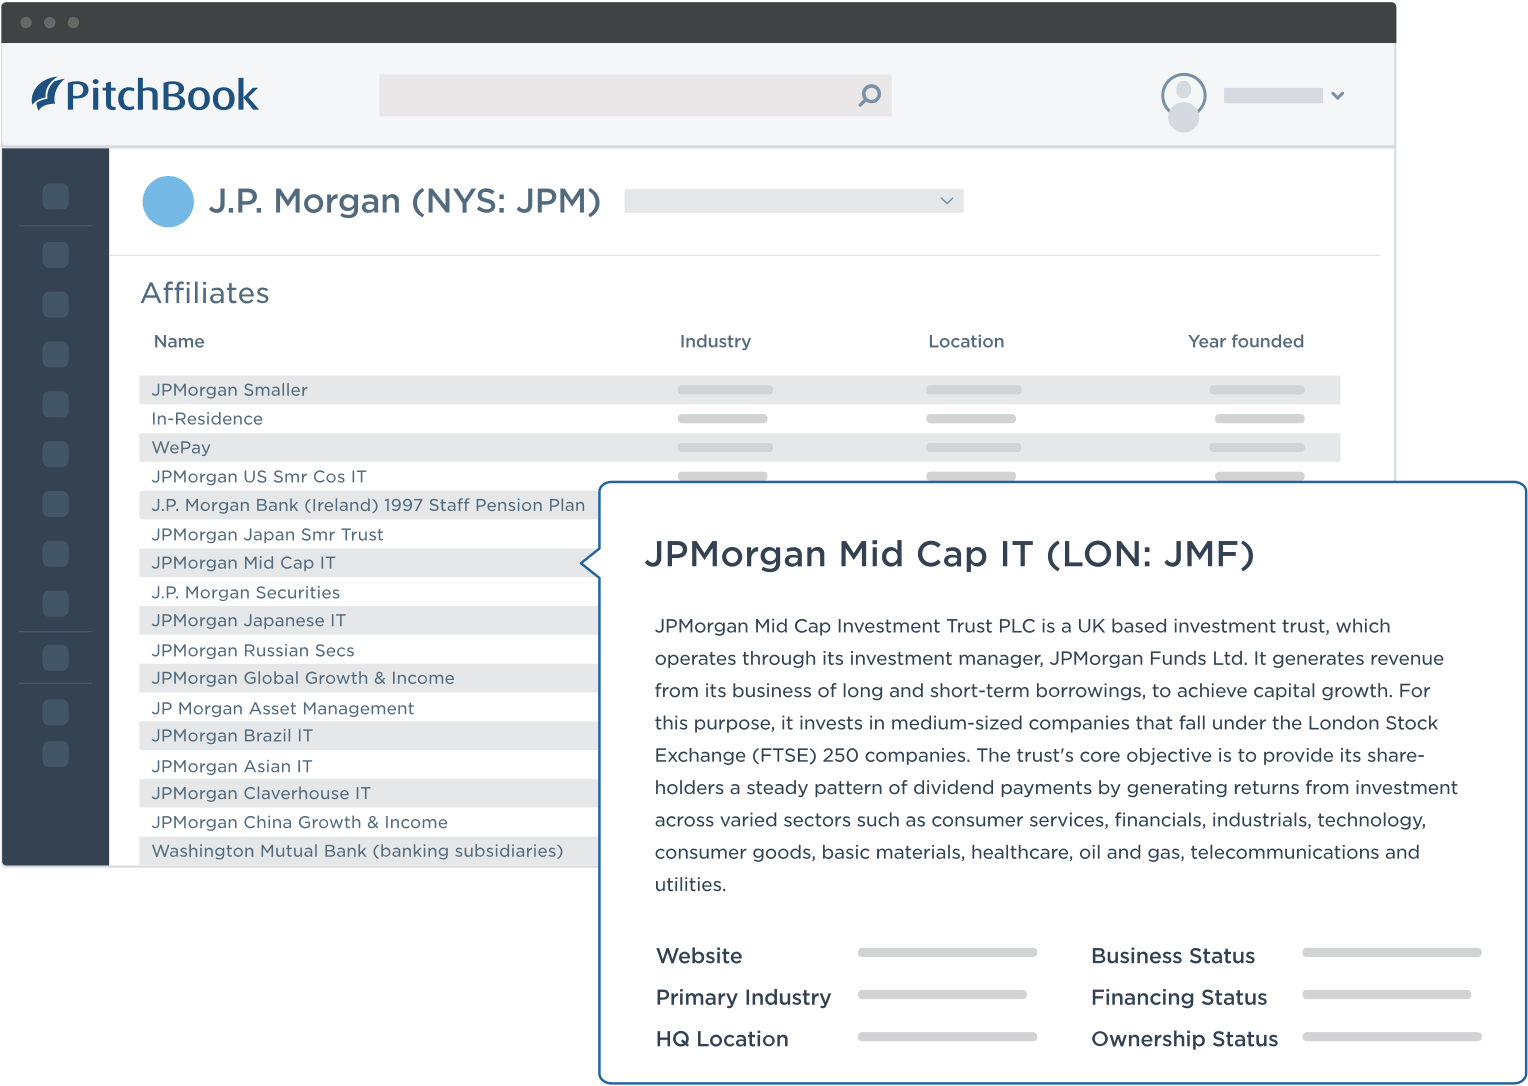 PitchBook data showing JP Morgan’s affiliates, with highlight on JPMorgan Mid Cap IT.